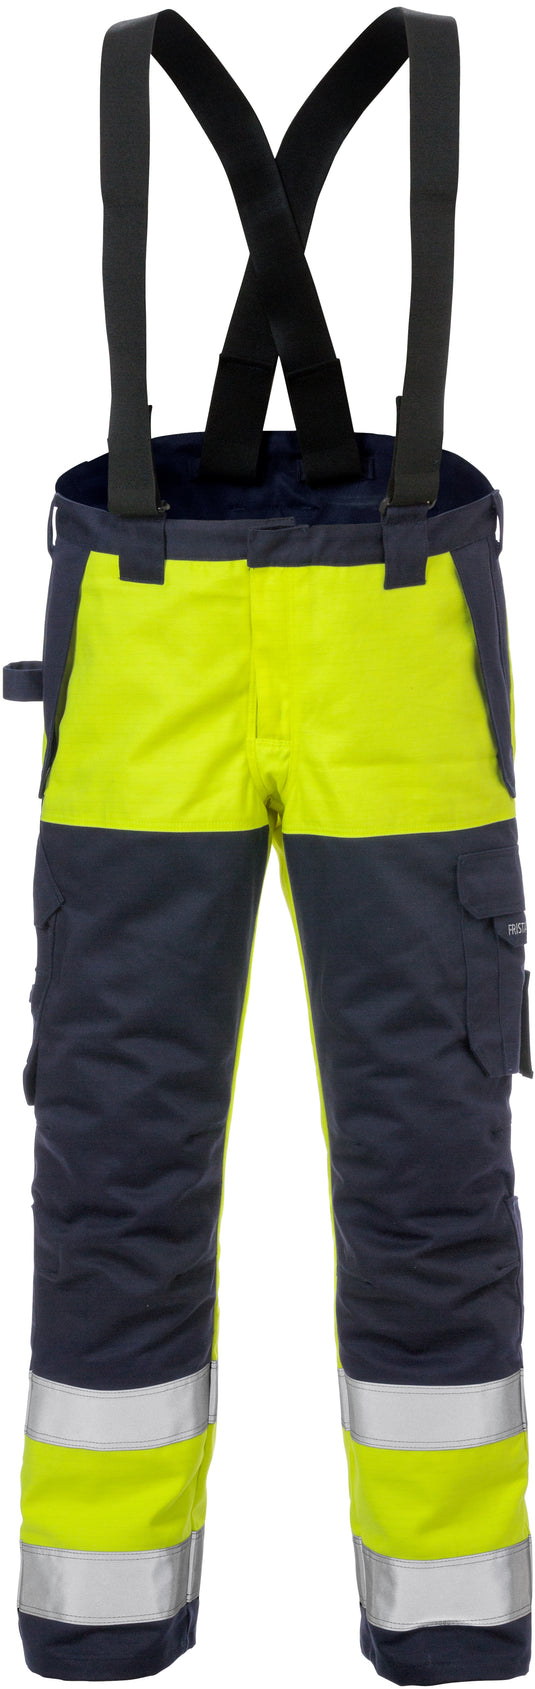 Trousers FRISTADS FLAME HIGH VIS WINTER TROUSERS CLASS 2 2588 FLAM